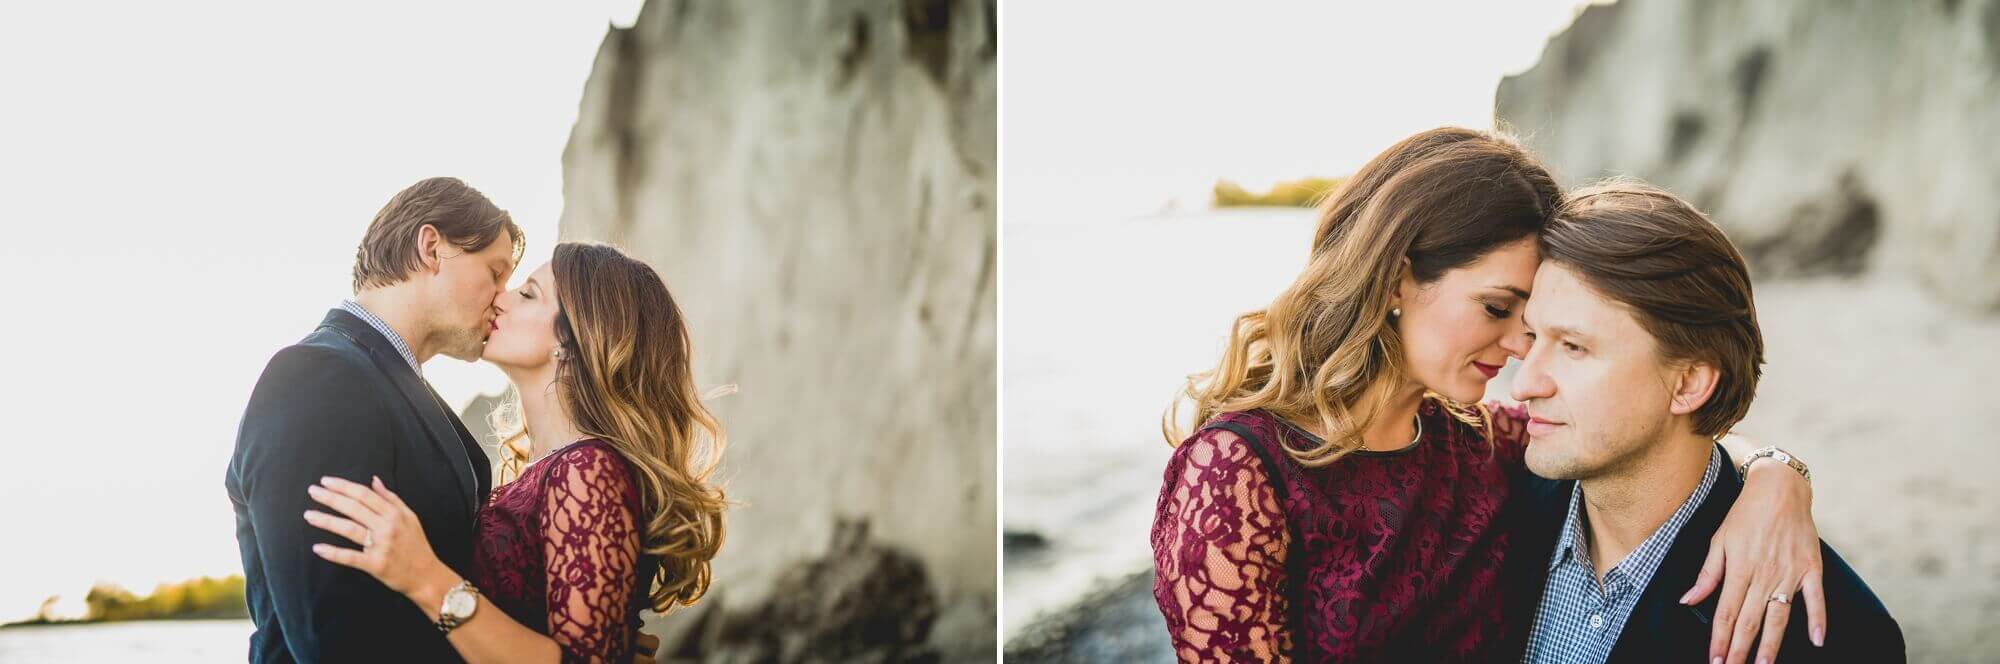 Romantic kiss for an engagement session at Scarborough Bluffs in Toronto